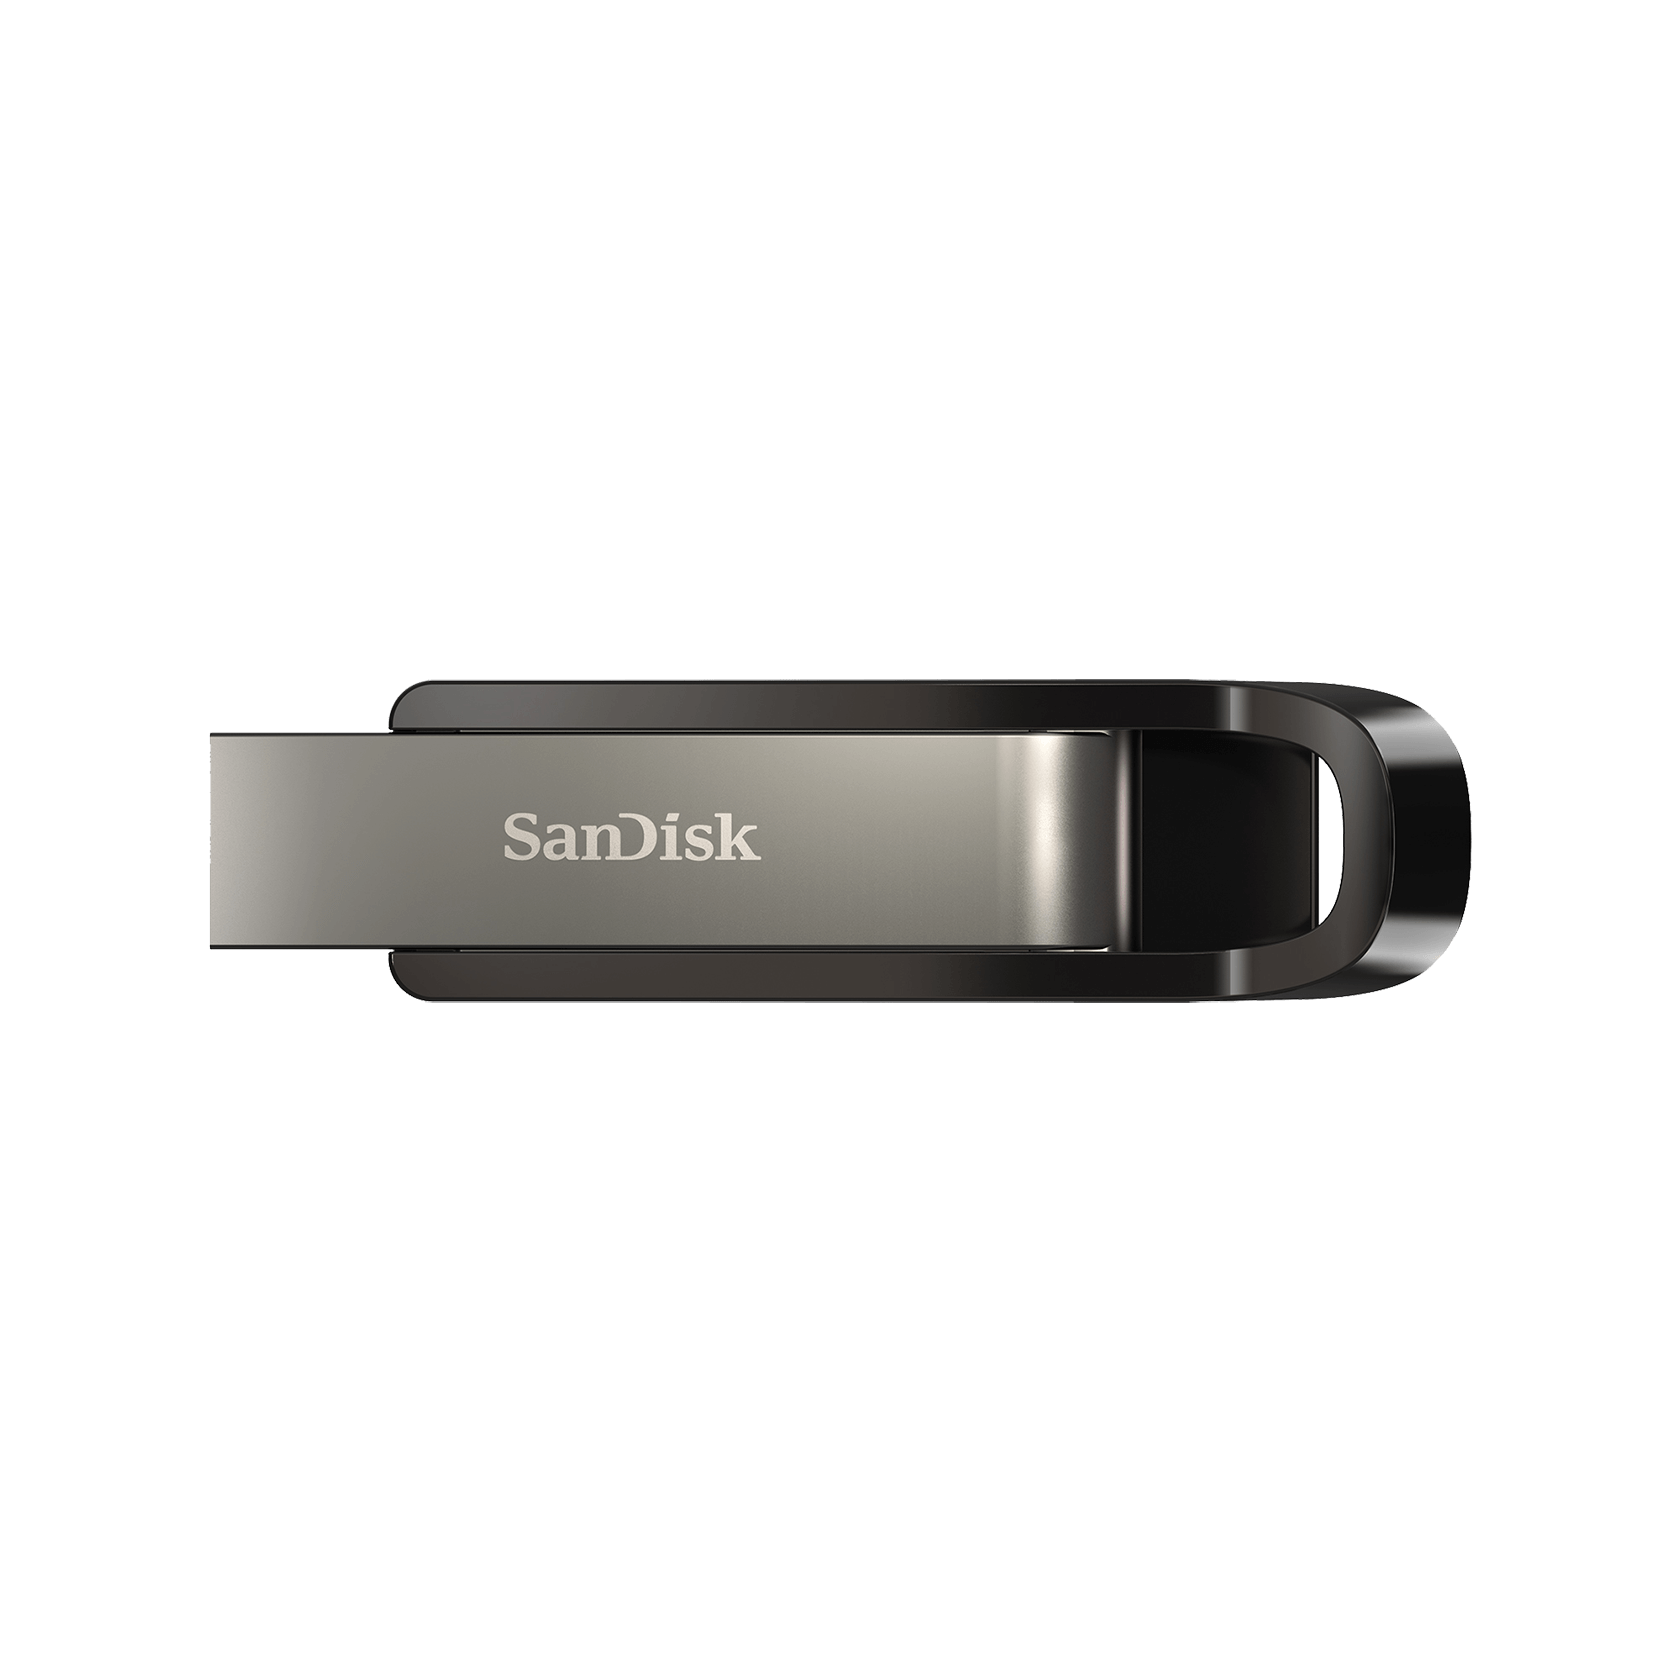 SanDisk 256GB Extreme Go USB 3.2 Gen 1 Flash Drive - SDCZ810-256G-A46 - image 1 of 8